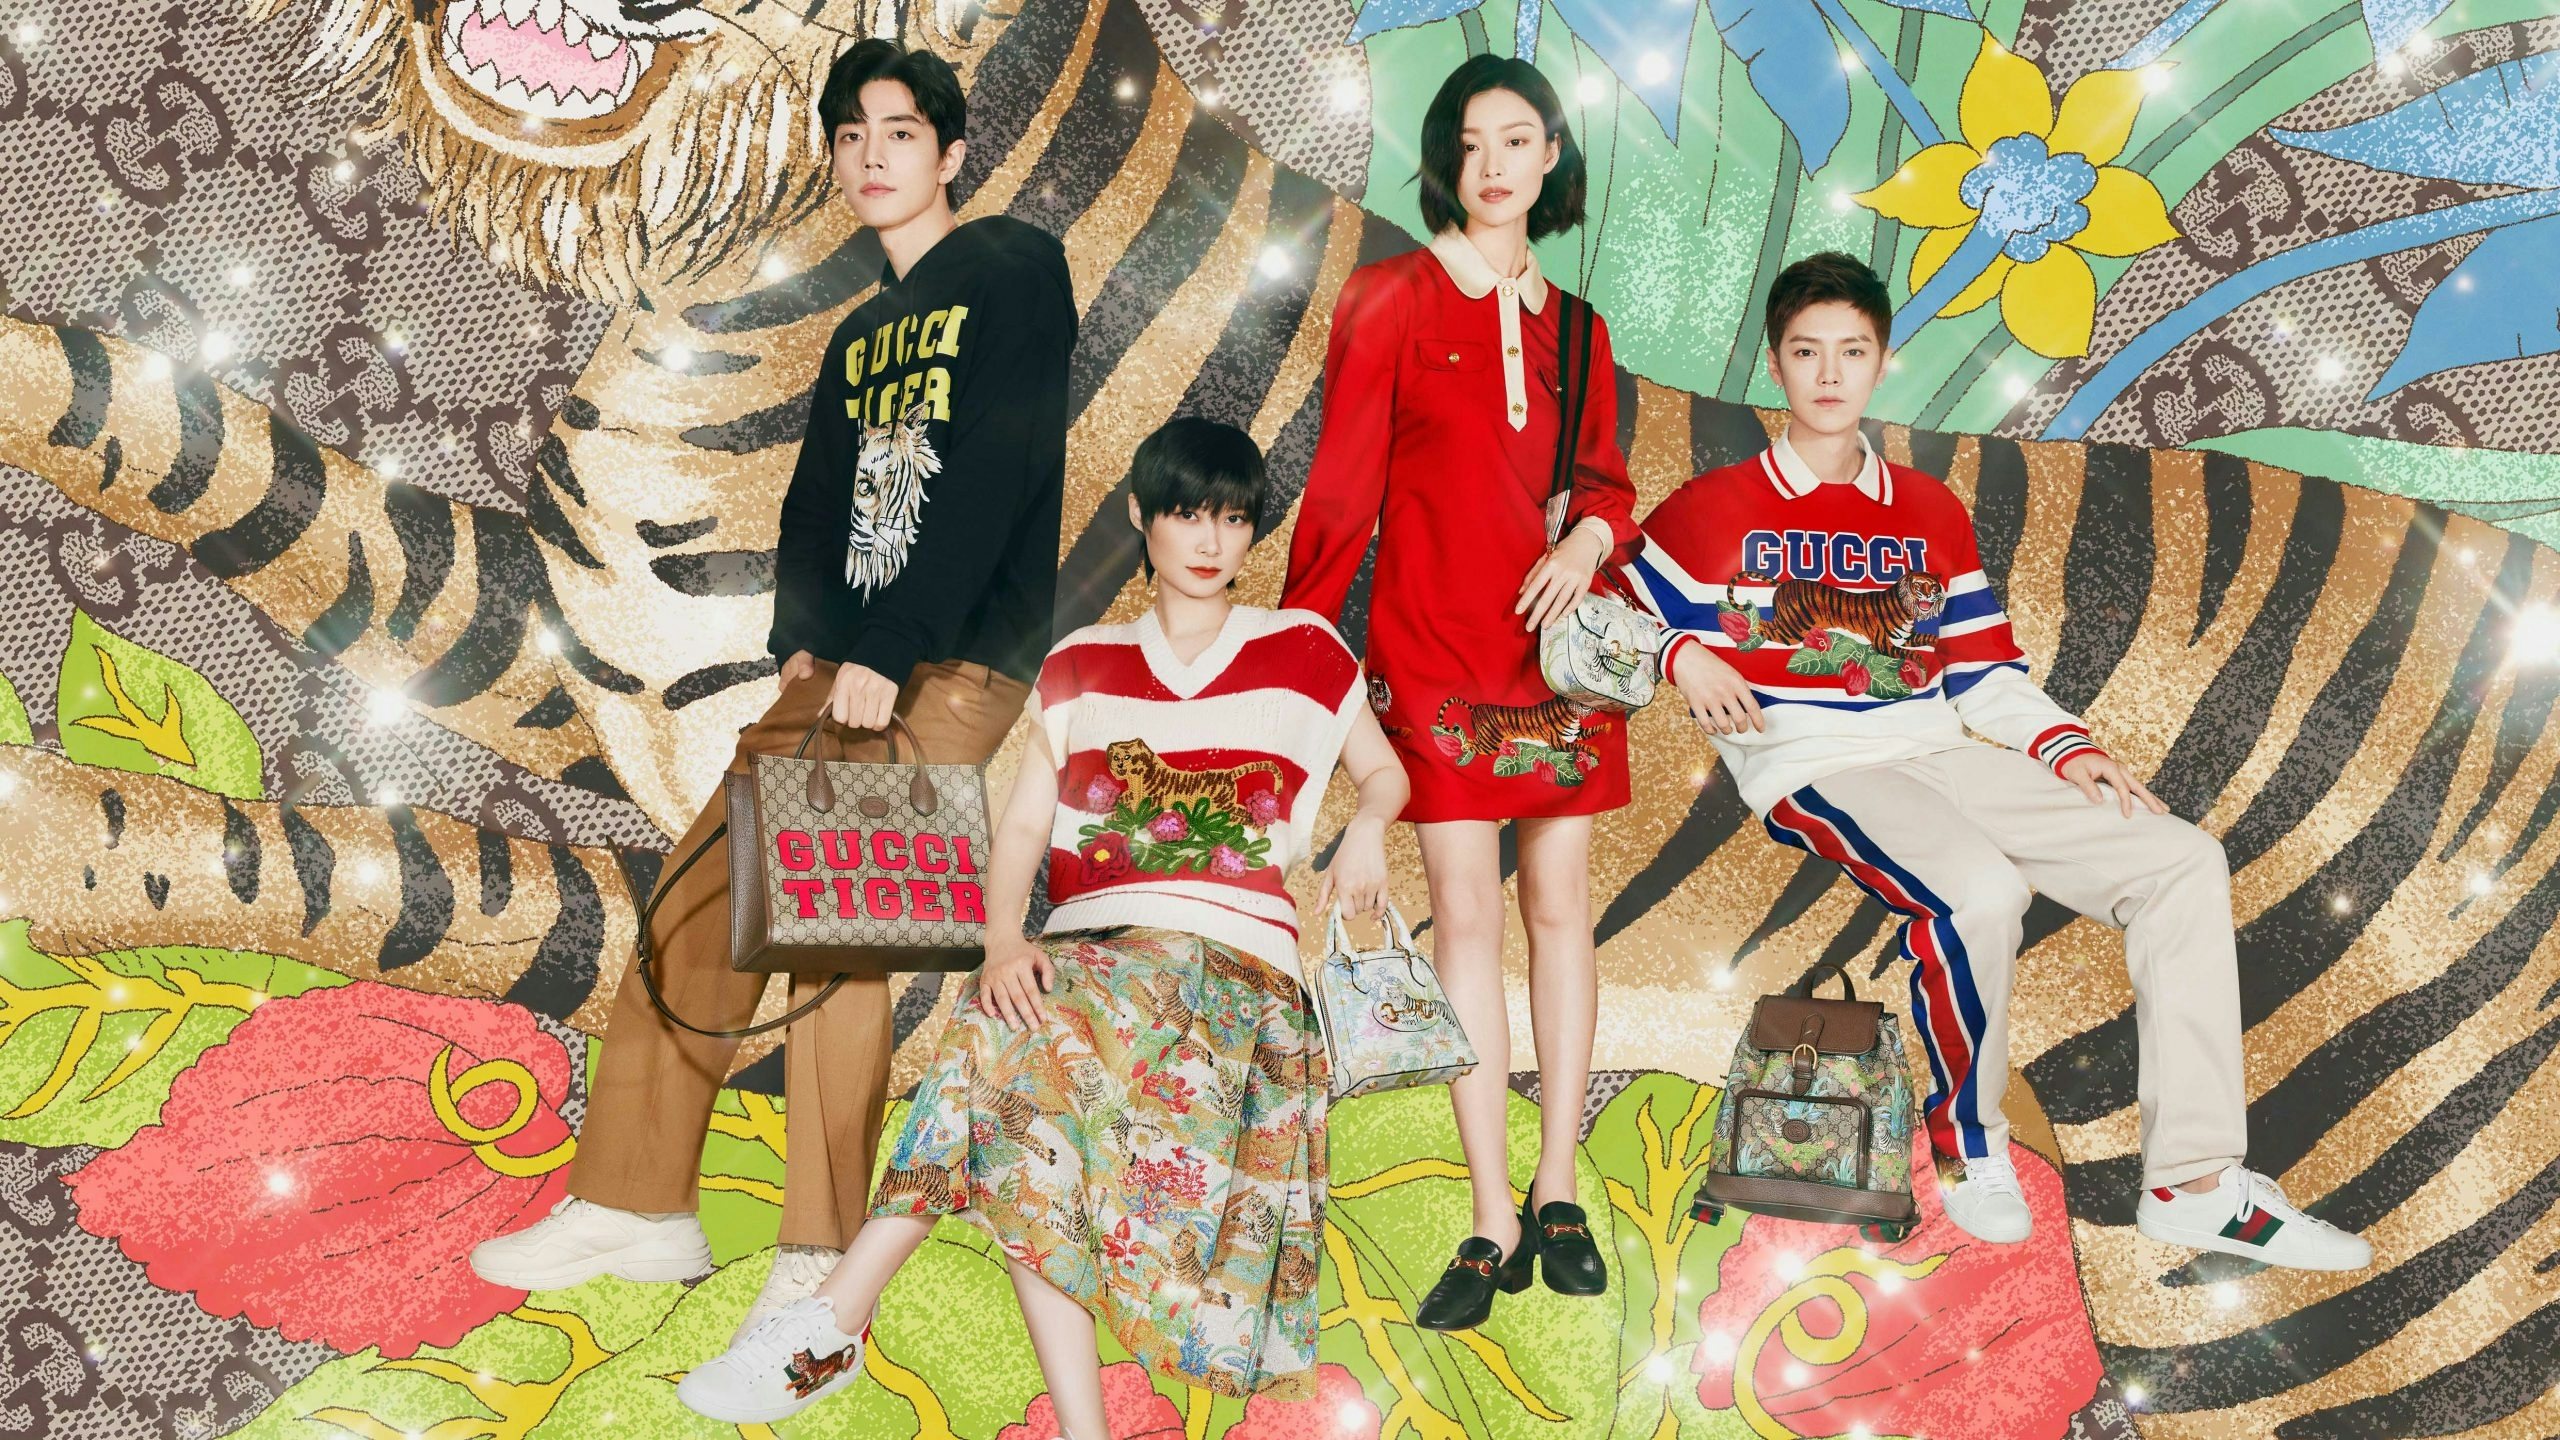 For an ad campaign earlier this year, Gucci created a family reunion scene with global brand ambassadors, including Chris Lee, Ni Ni, Lu Han, and Xiao Zhan. Photo: Courtesy of Gucci